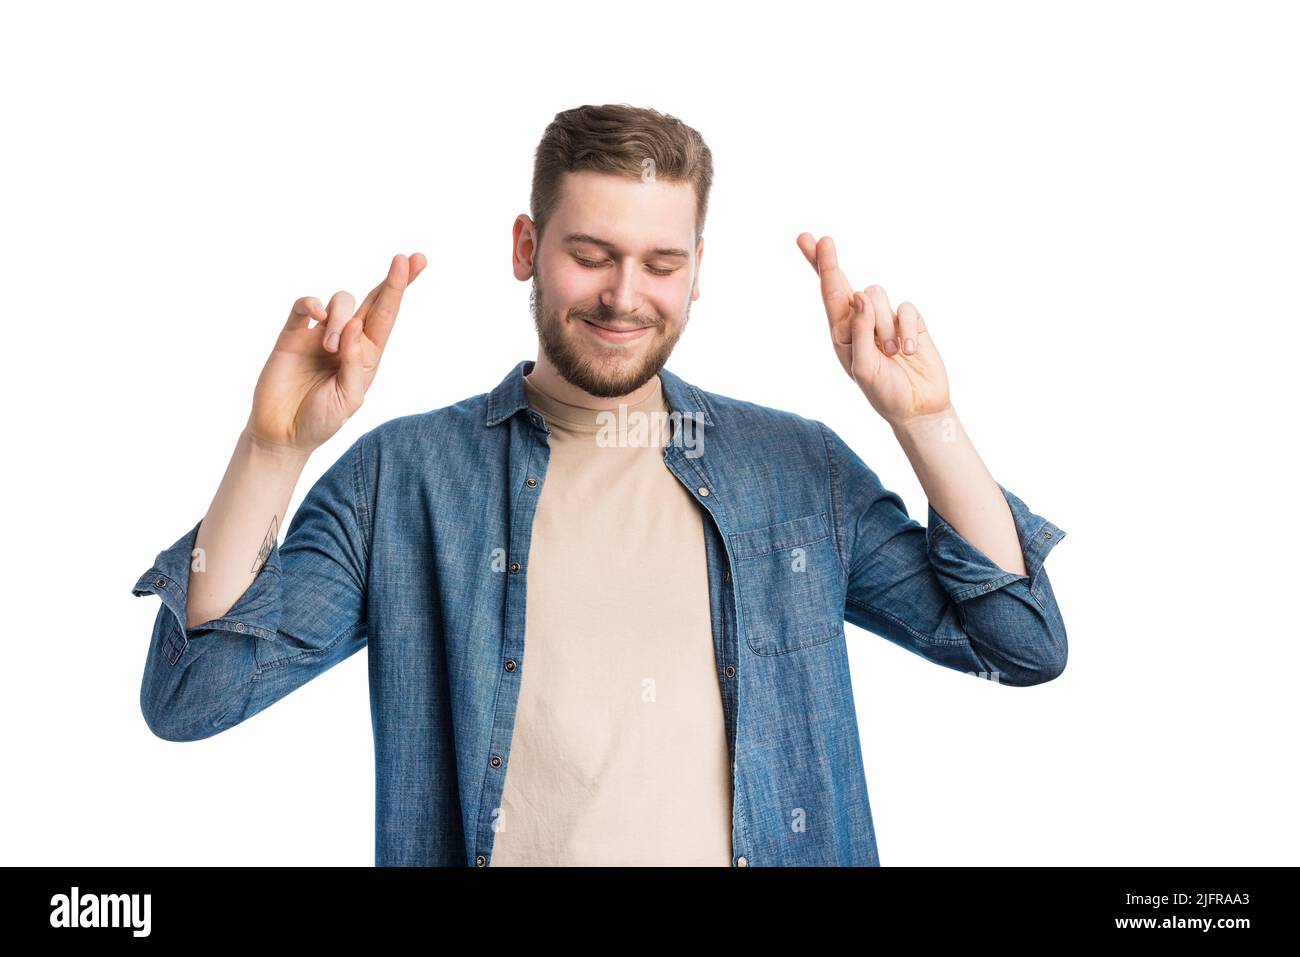 Man crossing fingers for luck Stock Photo